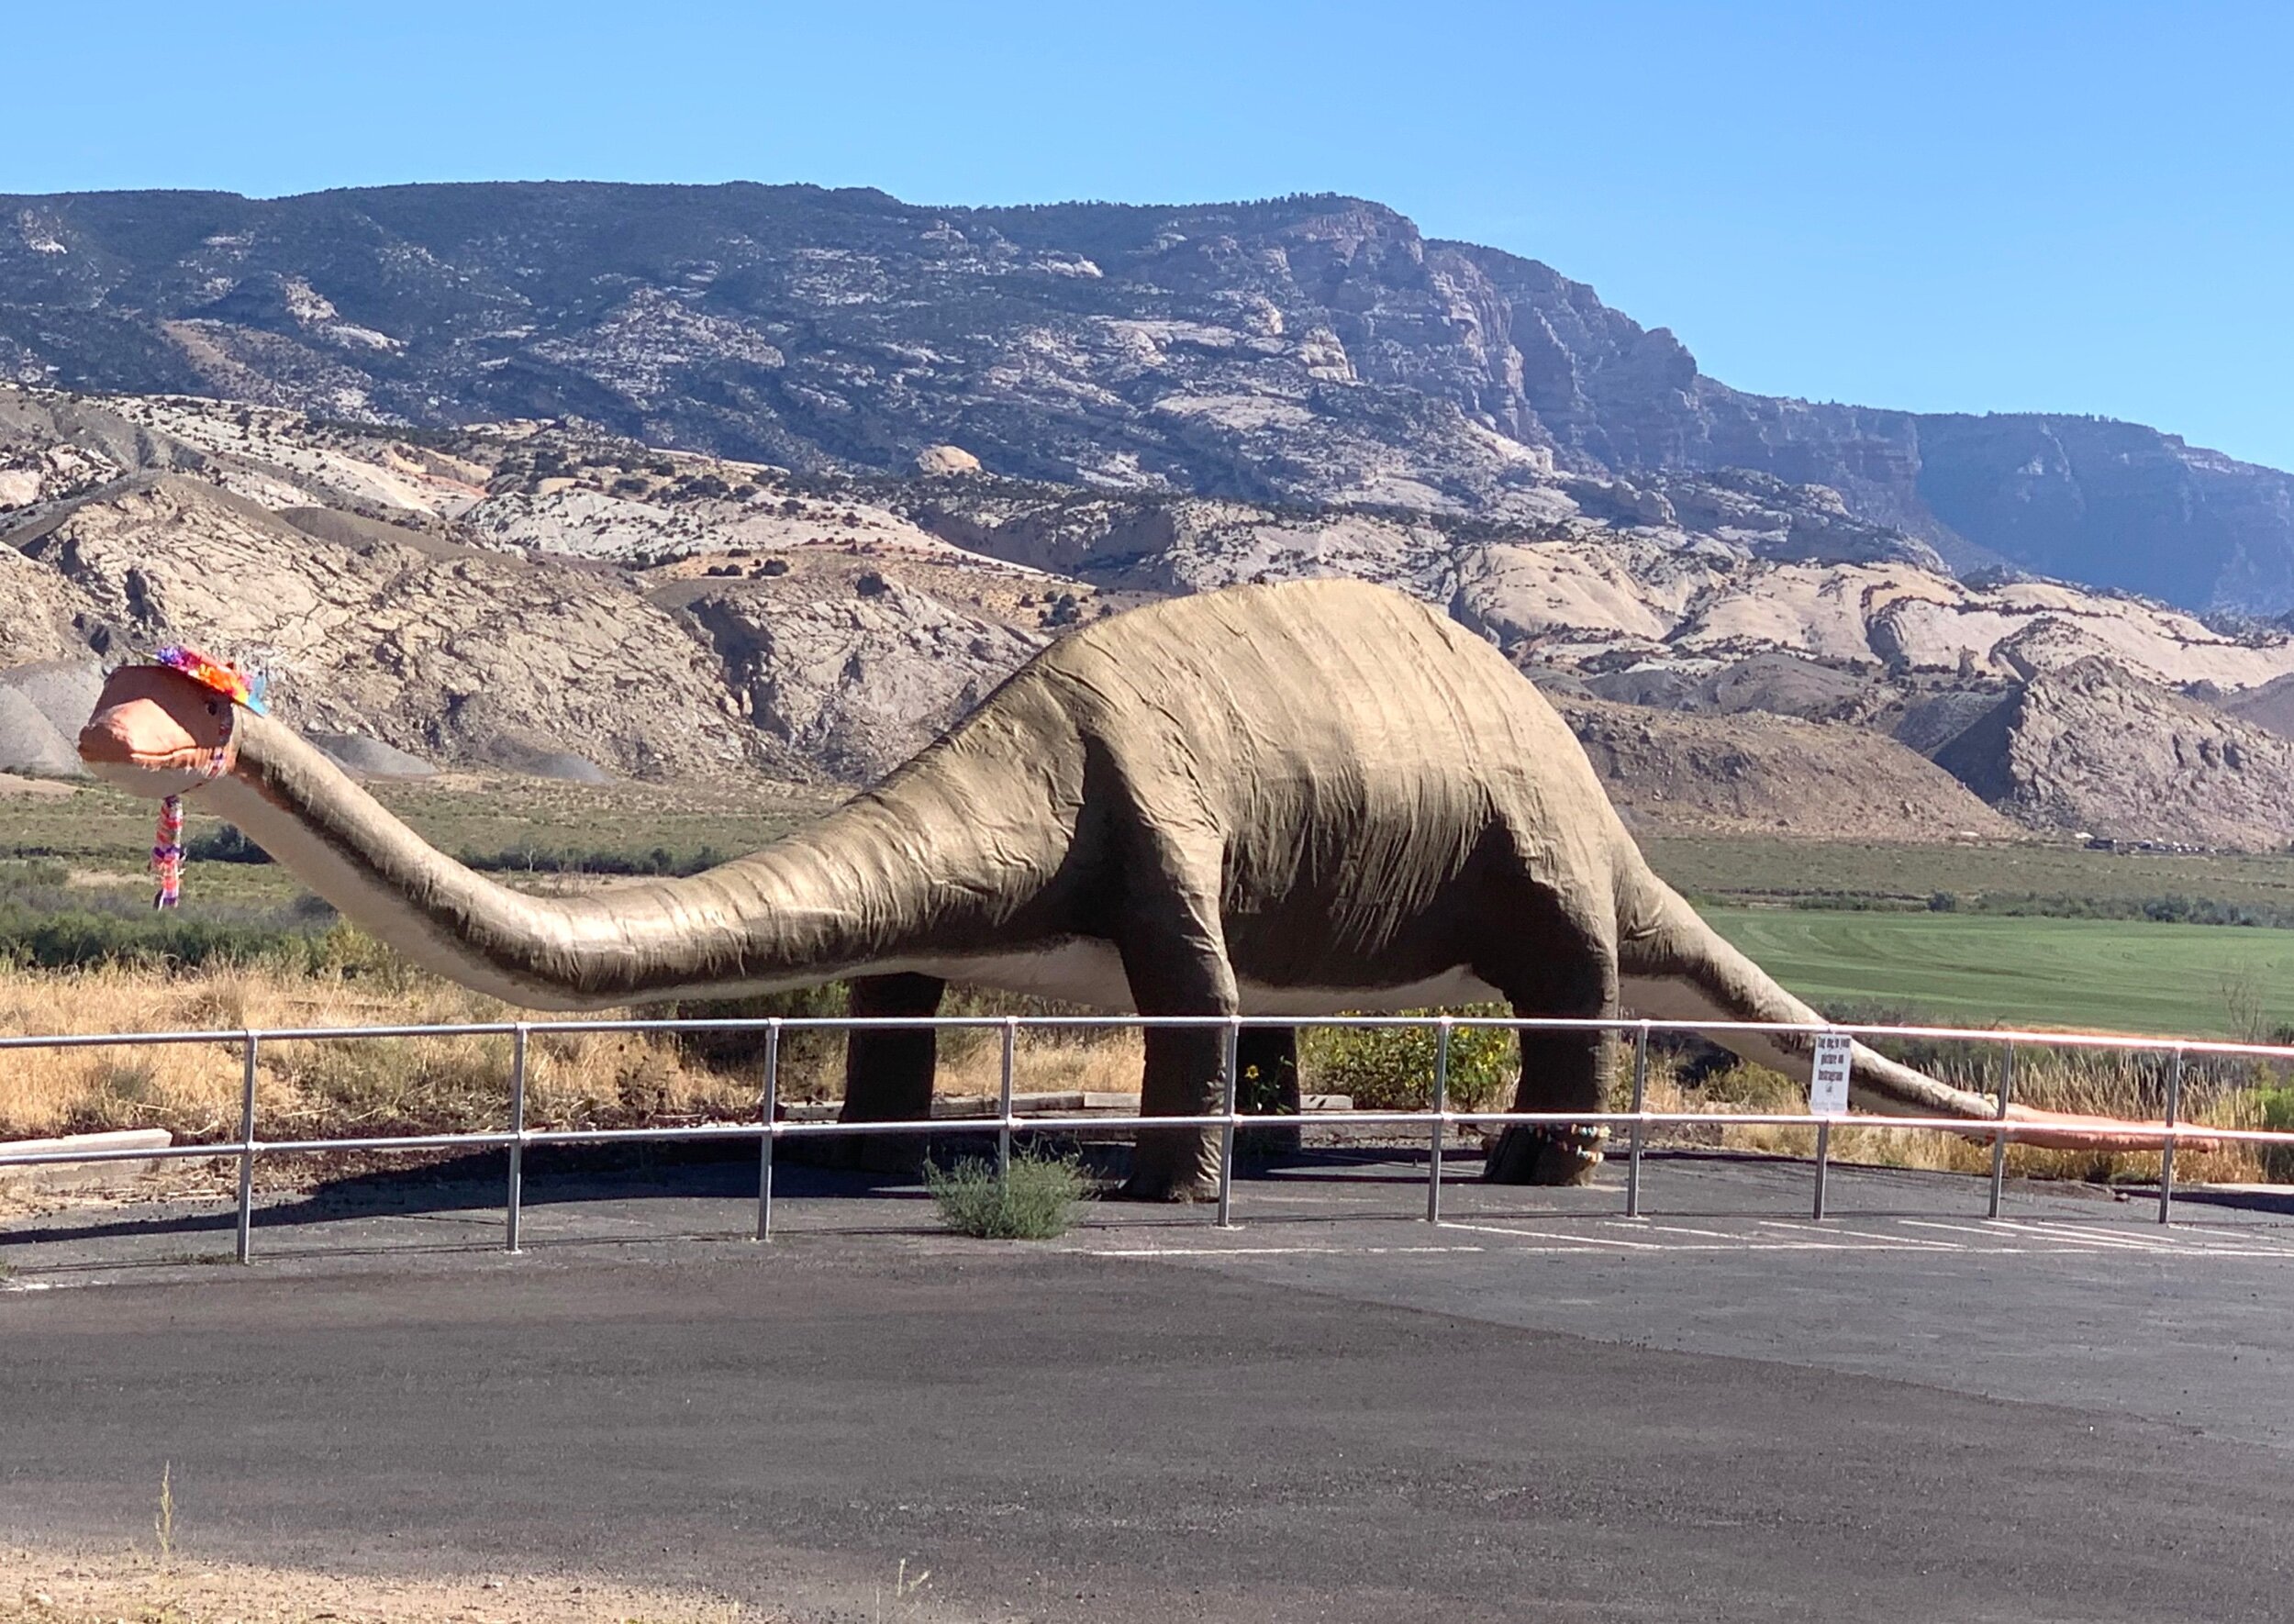   Dinosaur, Colorado,  is named for all the dinosaur fossils found in this area—and the town really embraces their name! 🐱‍🐉 